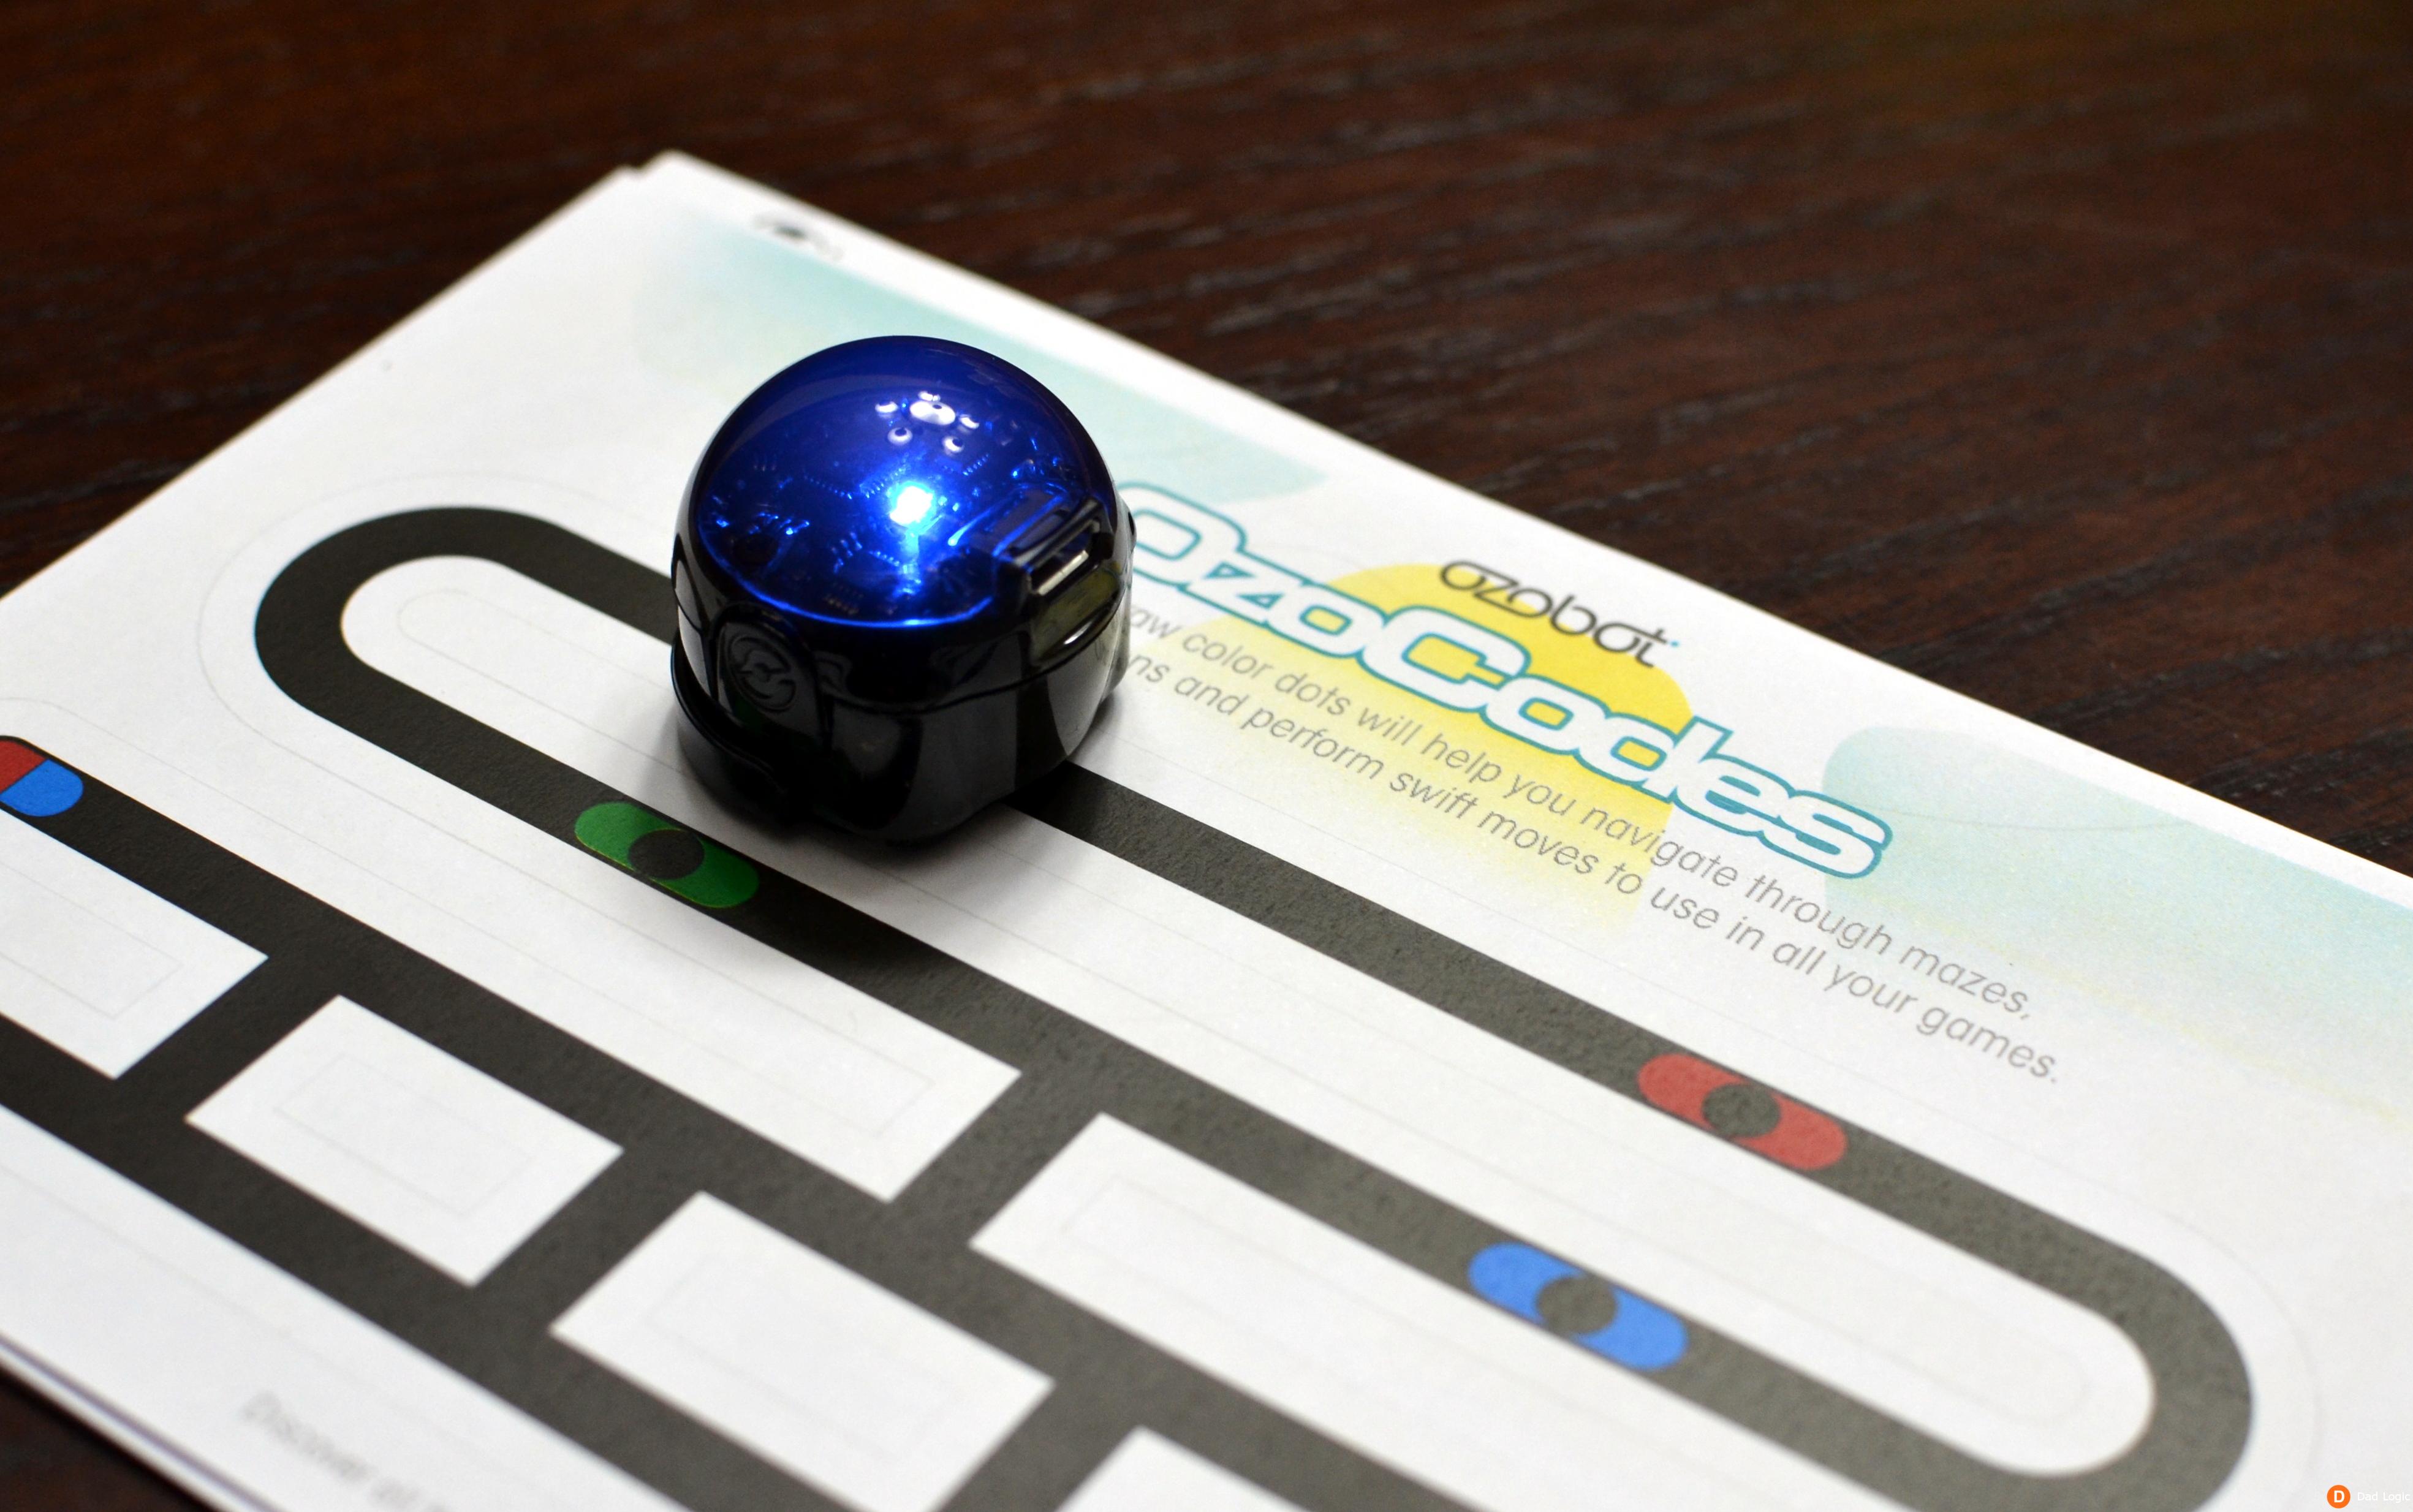 Ozobot  Robots to code and create with